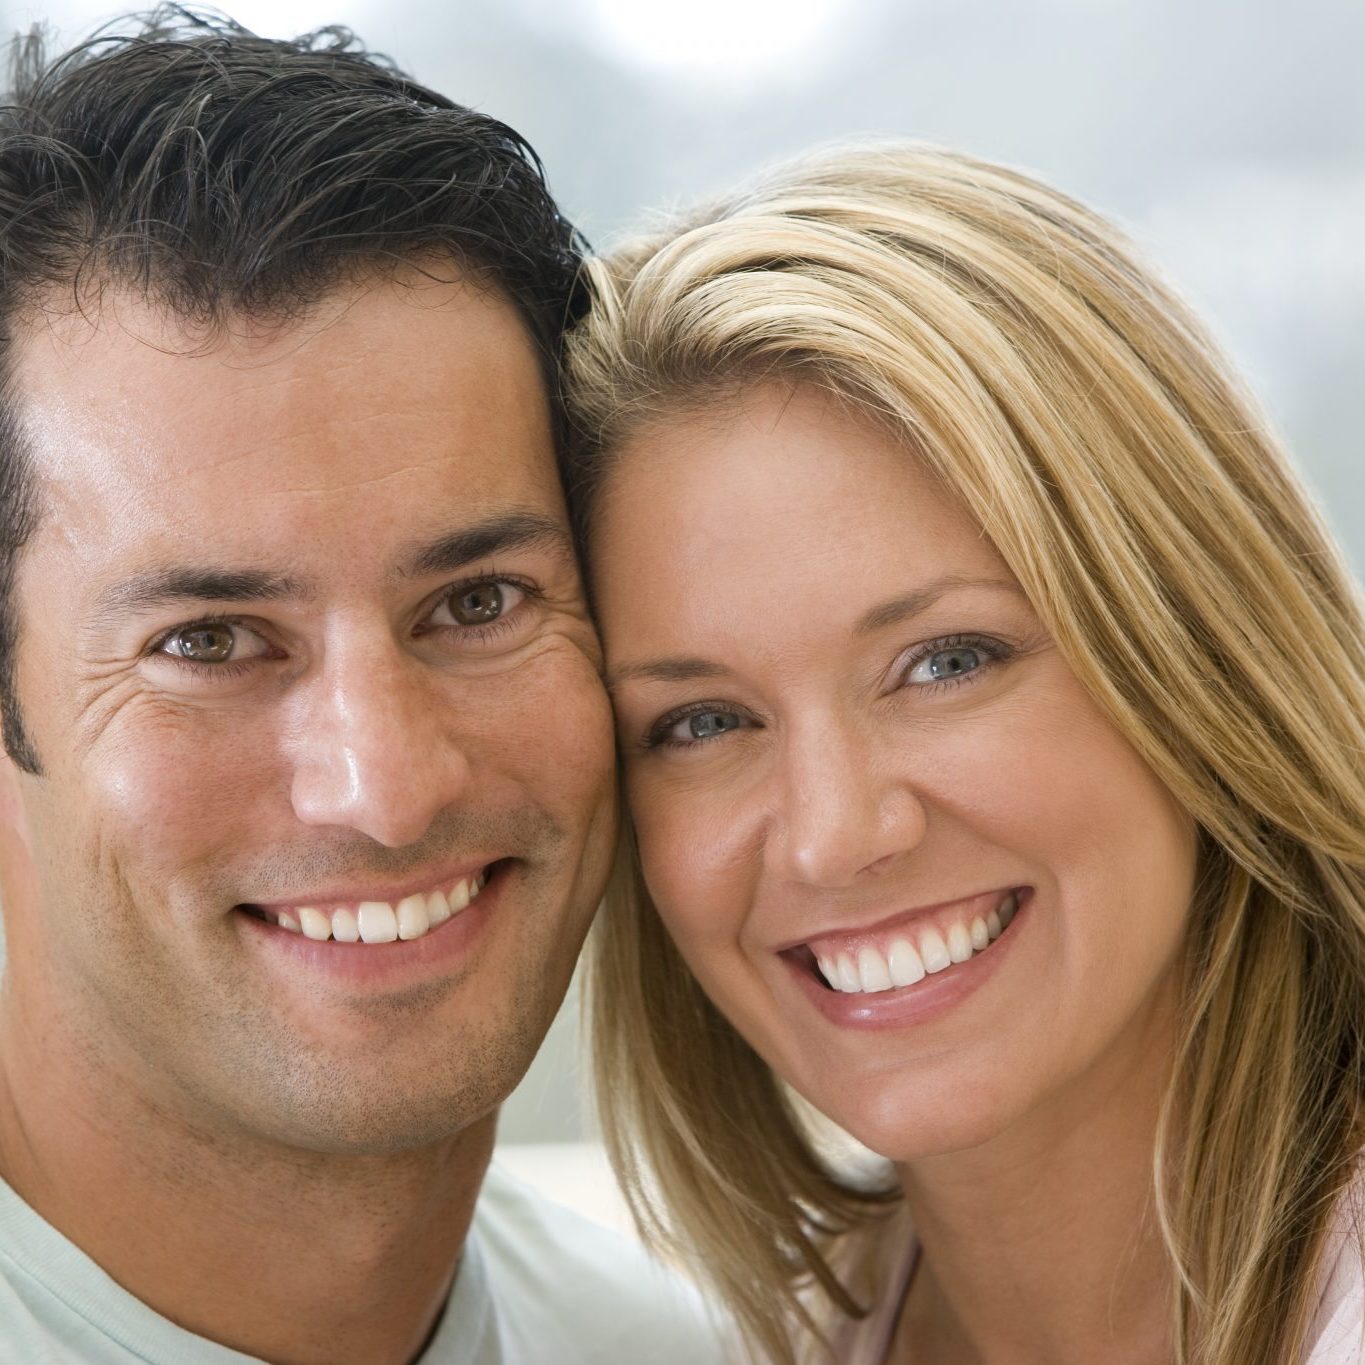 bigstock-Couples-Indoors-Smiling-4135977